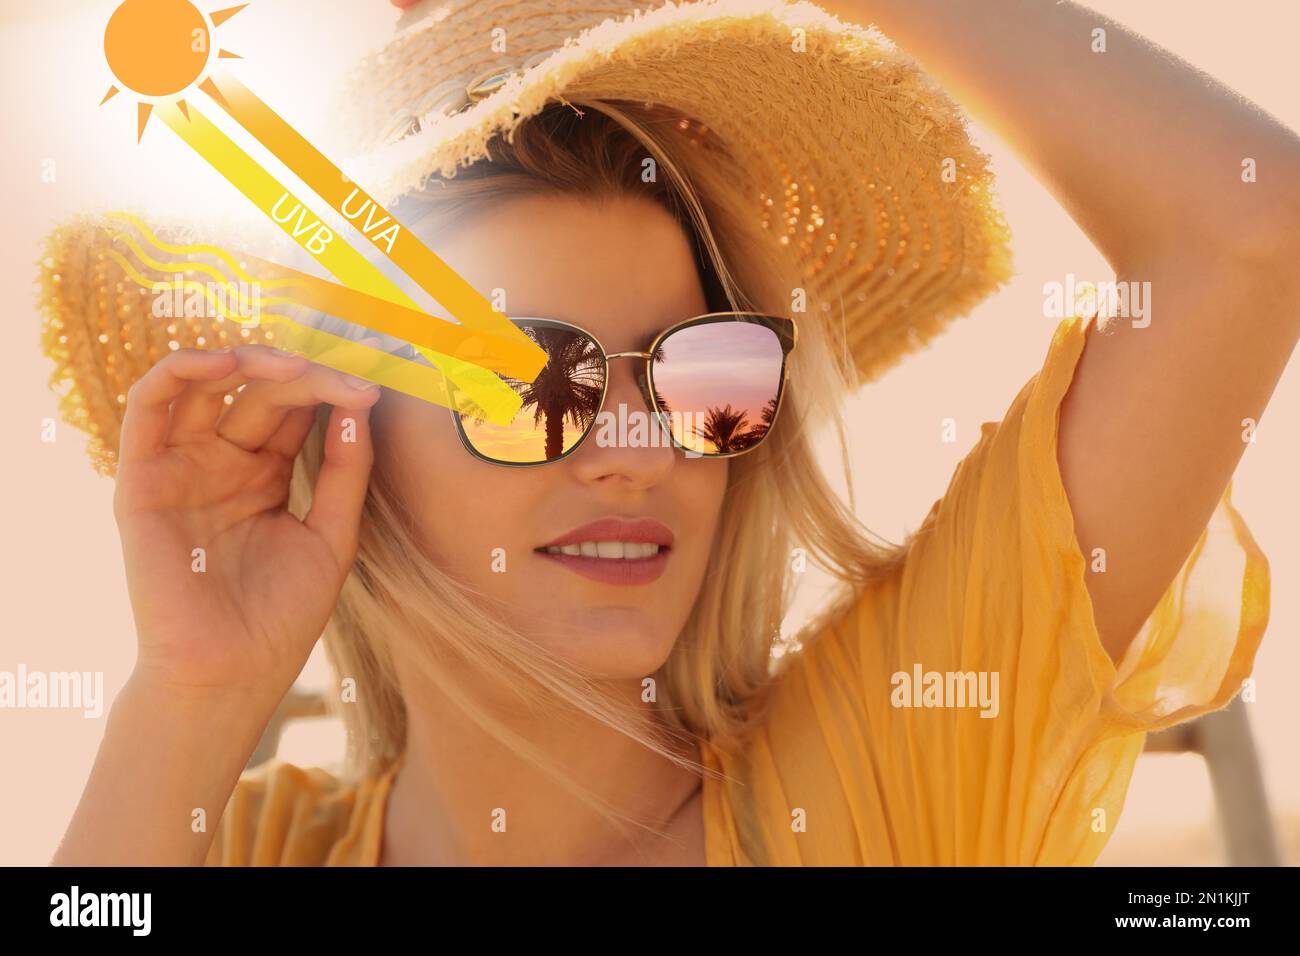 Woman wearing sunglasses outdoors. UVA and UVB rays reflected by lenses, illustration Stock Photo